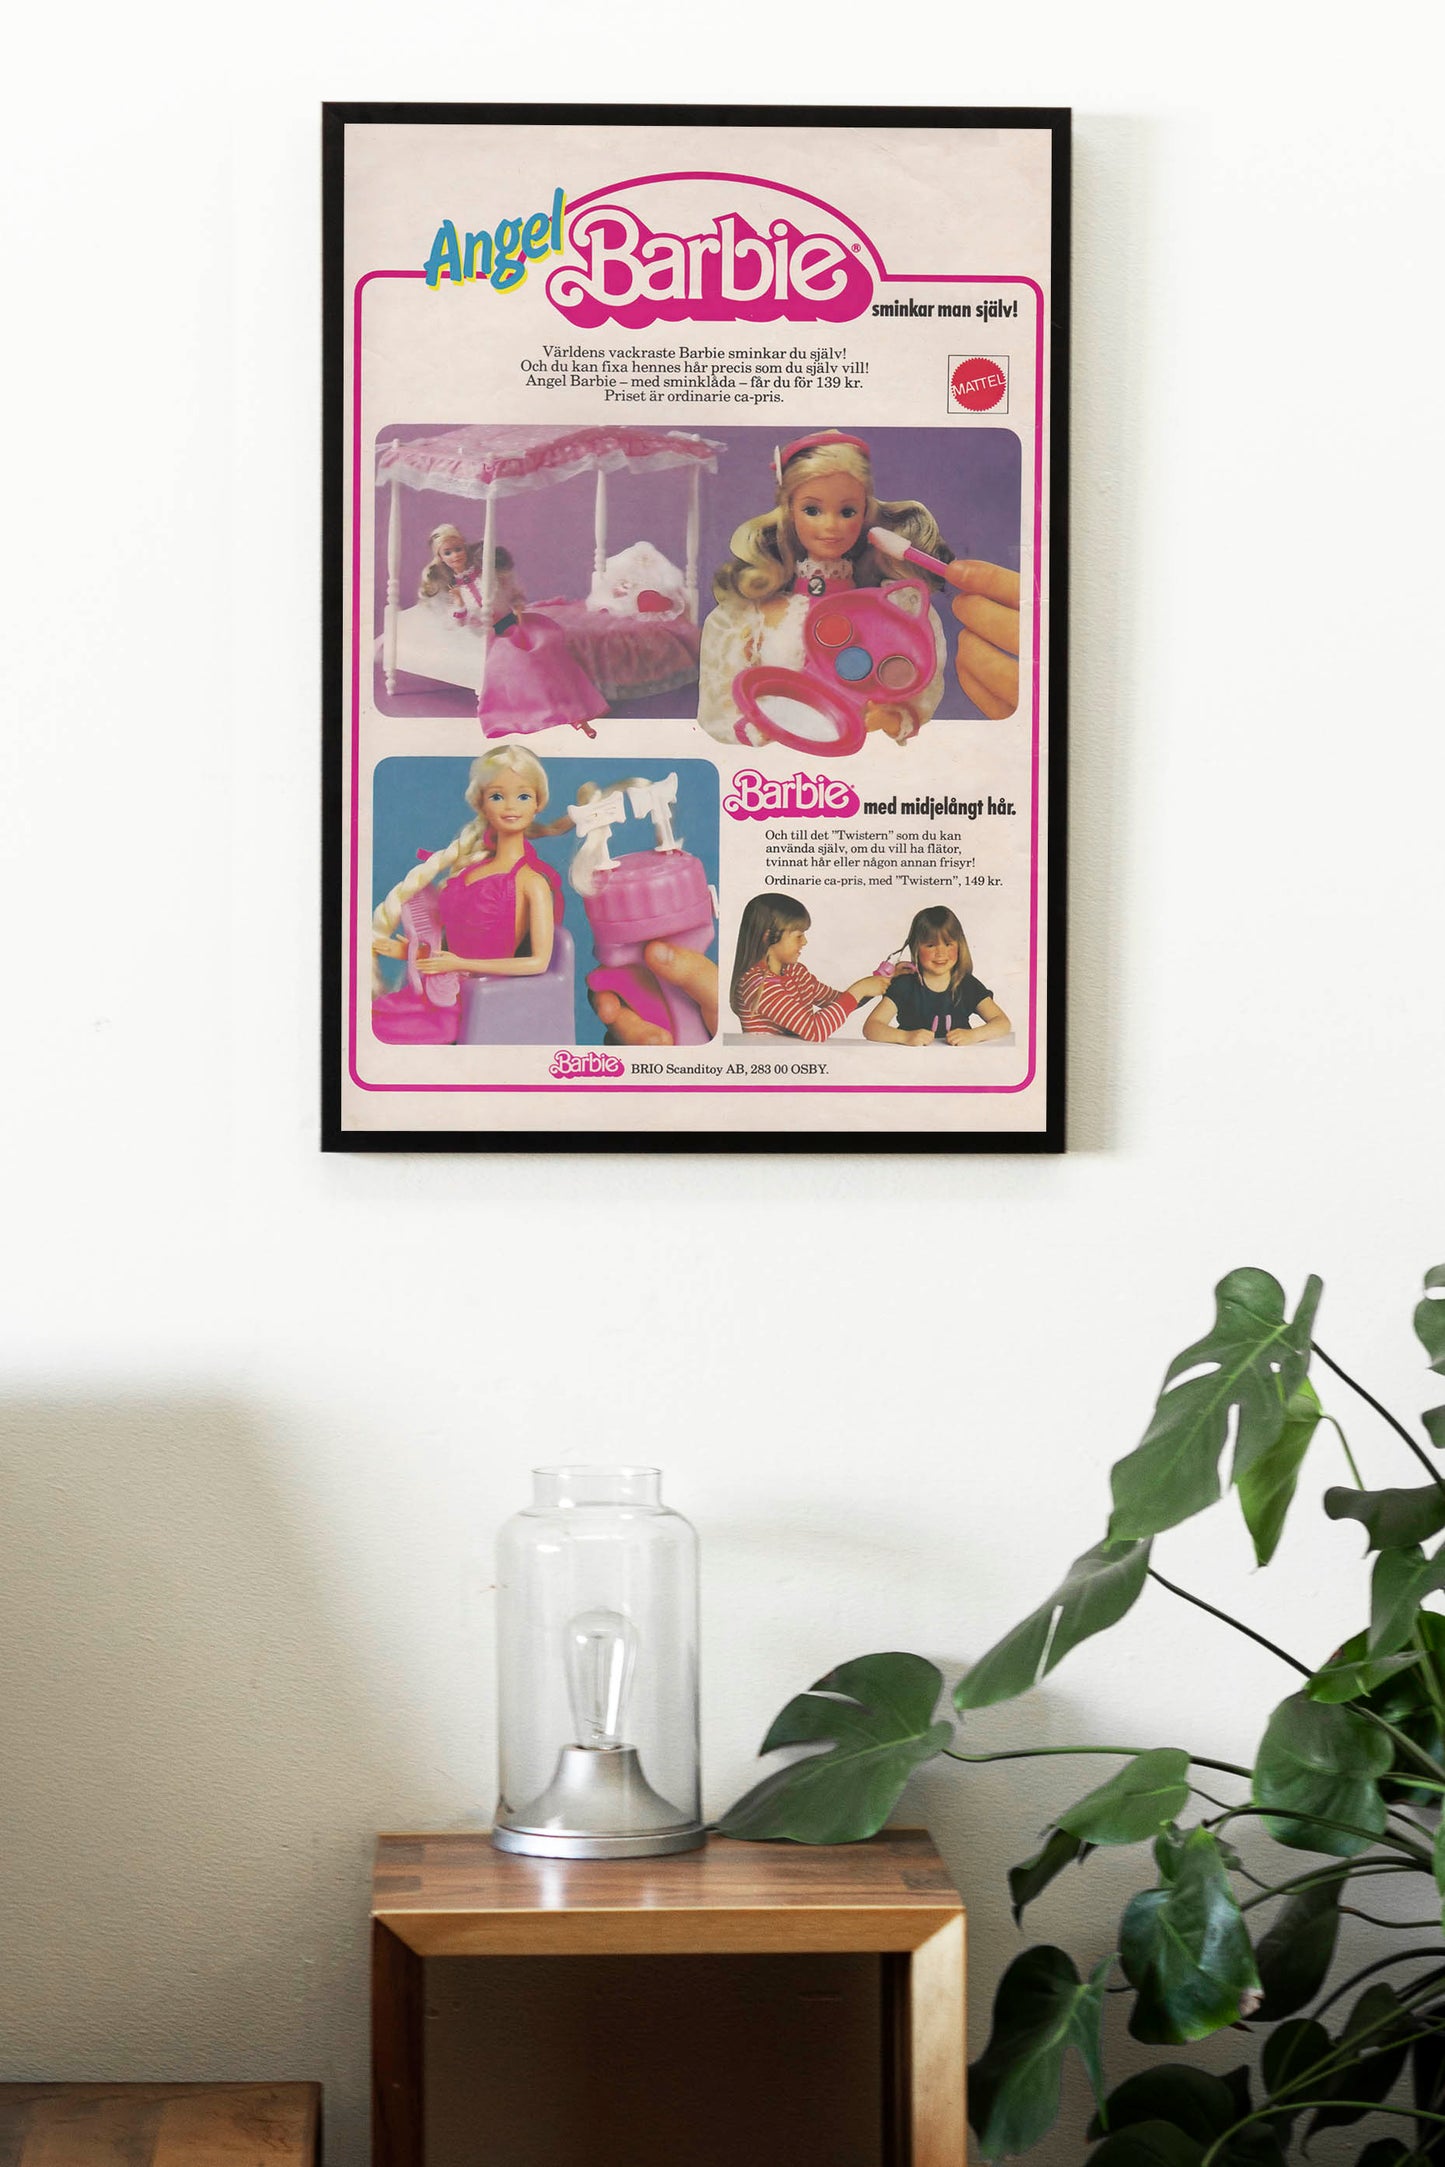 Barbie Doll Poster